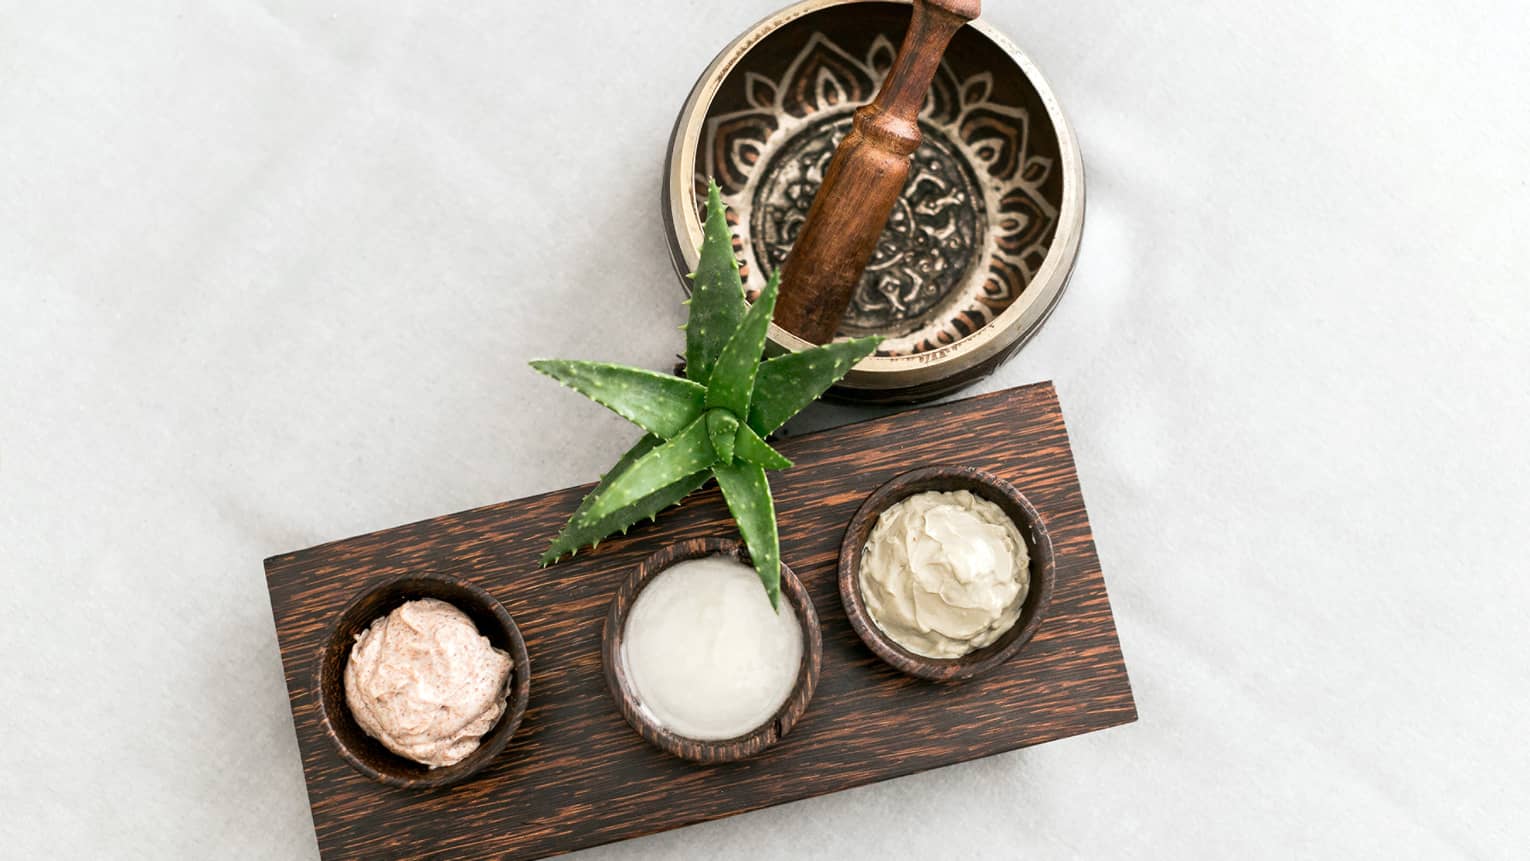 Aerial view of decorative mortar and pestle, small aloe plant, wood tray with three small bowls with creams